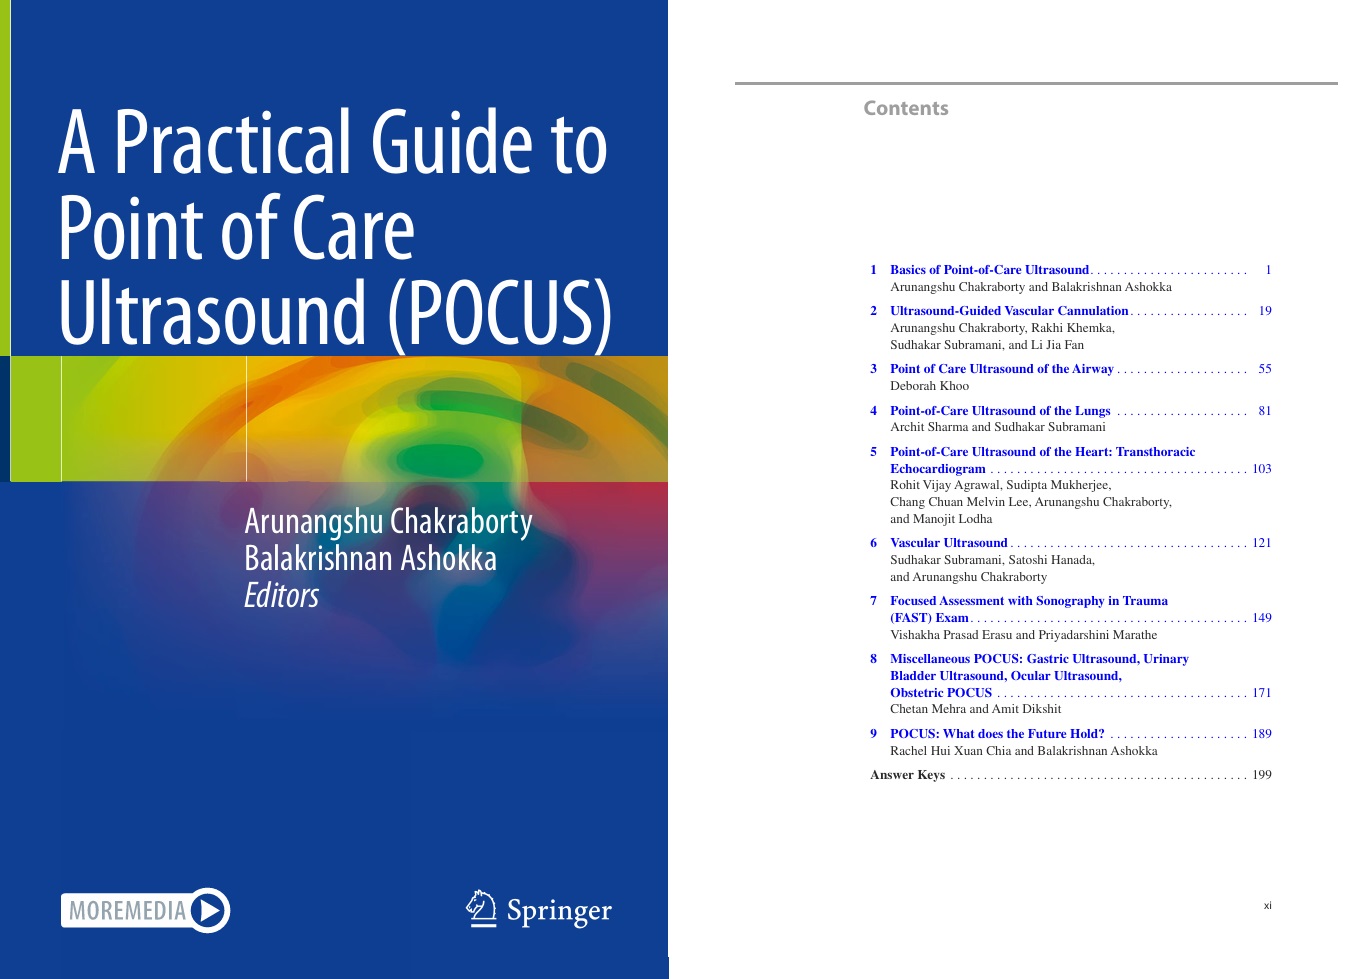 A pratical guide to Point of Care Ultrasound POCUS